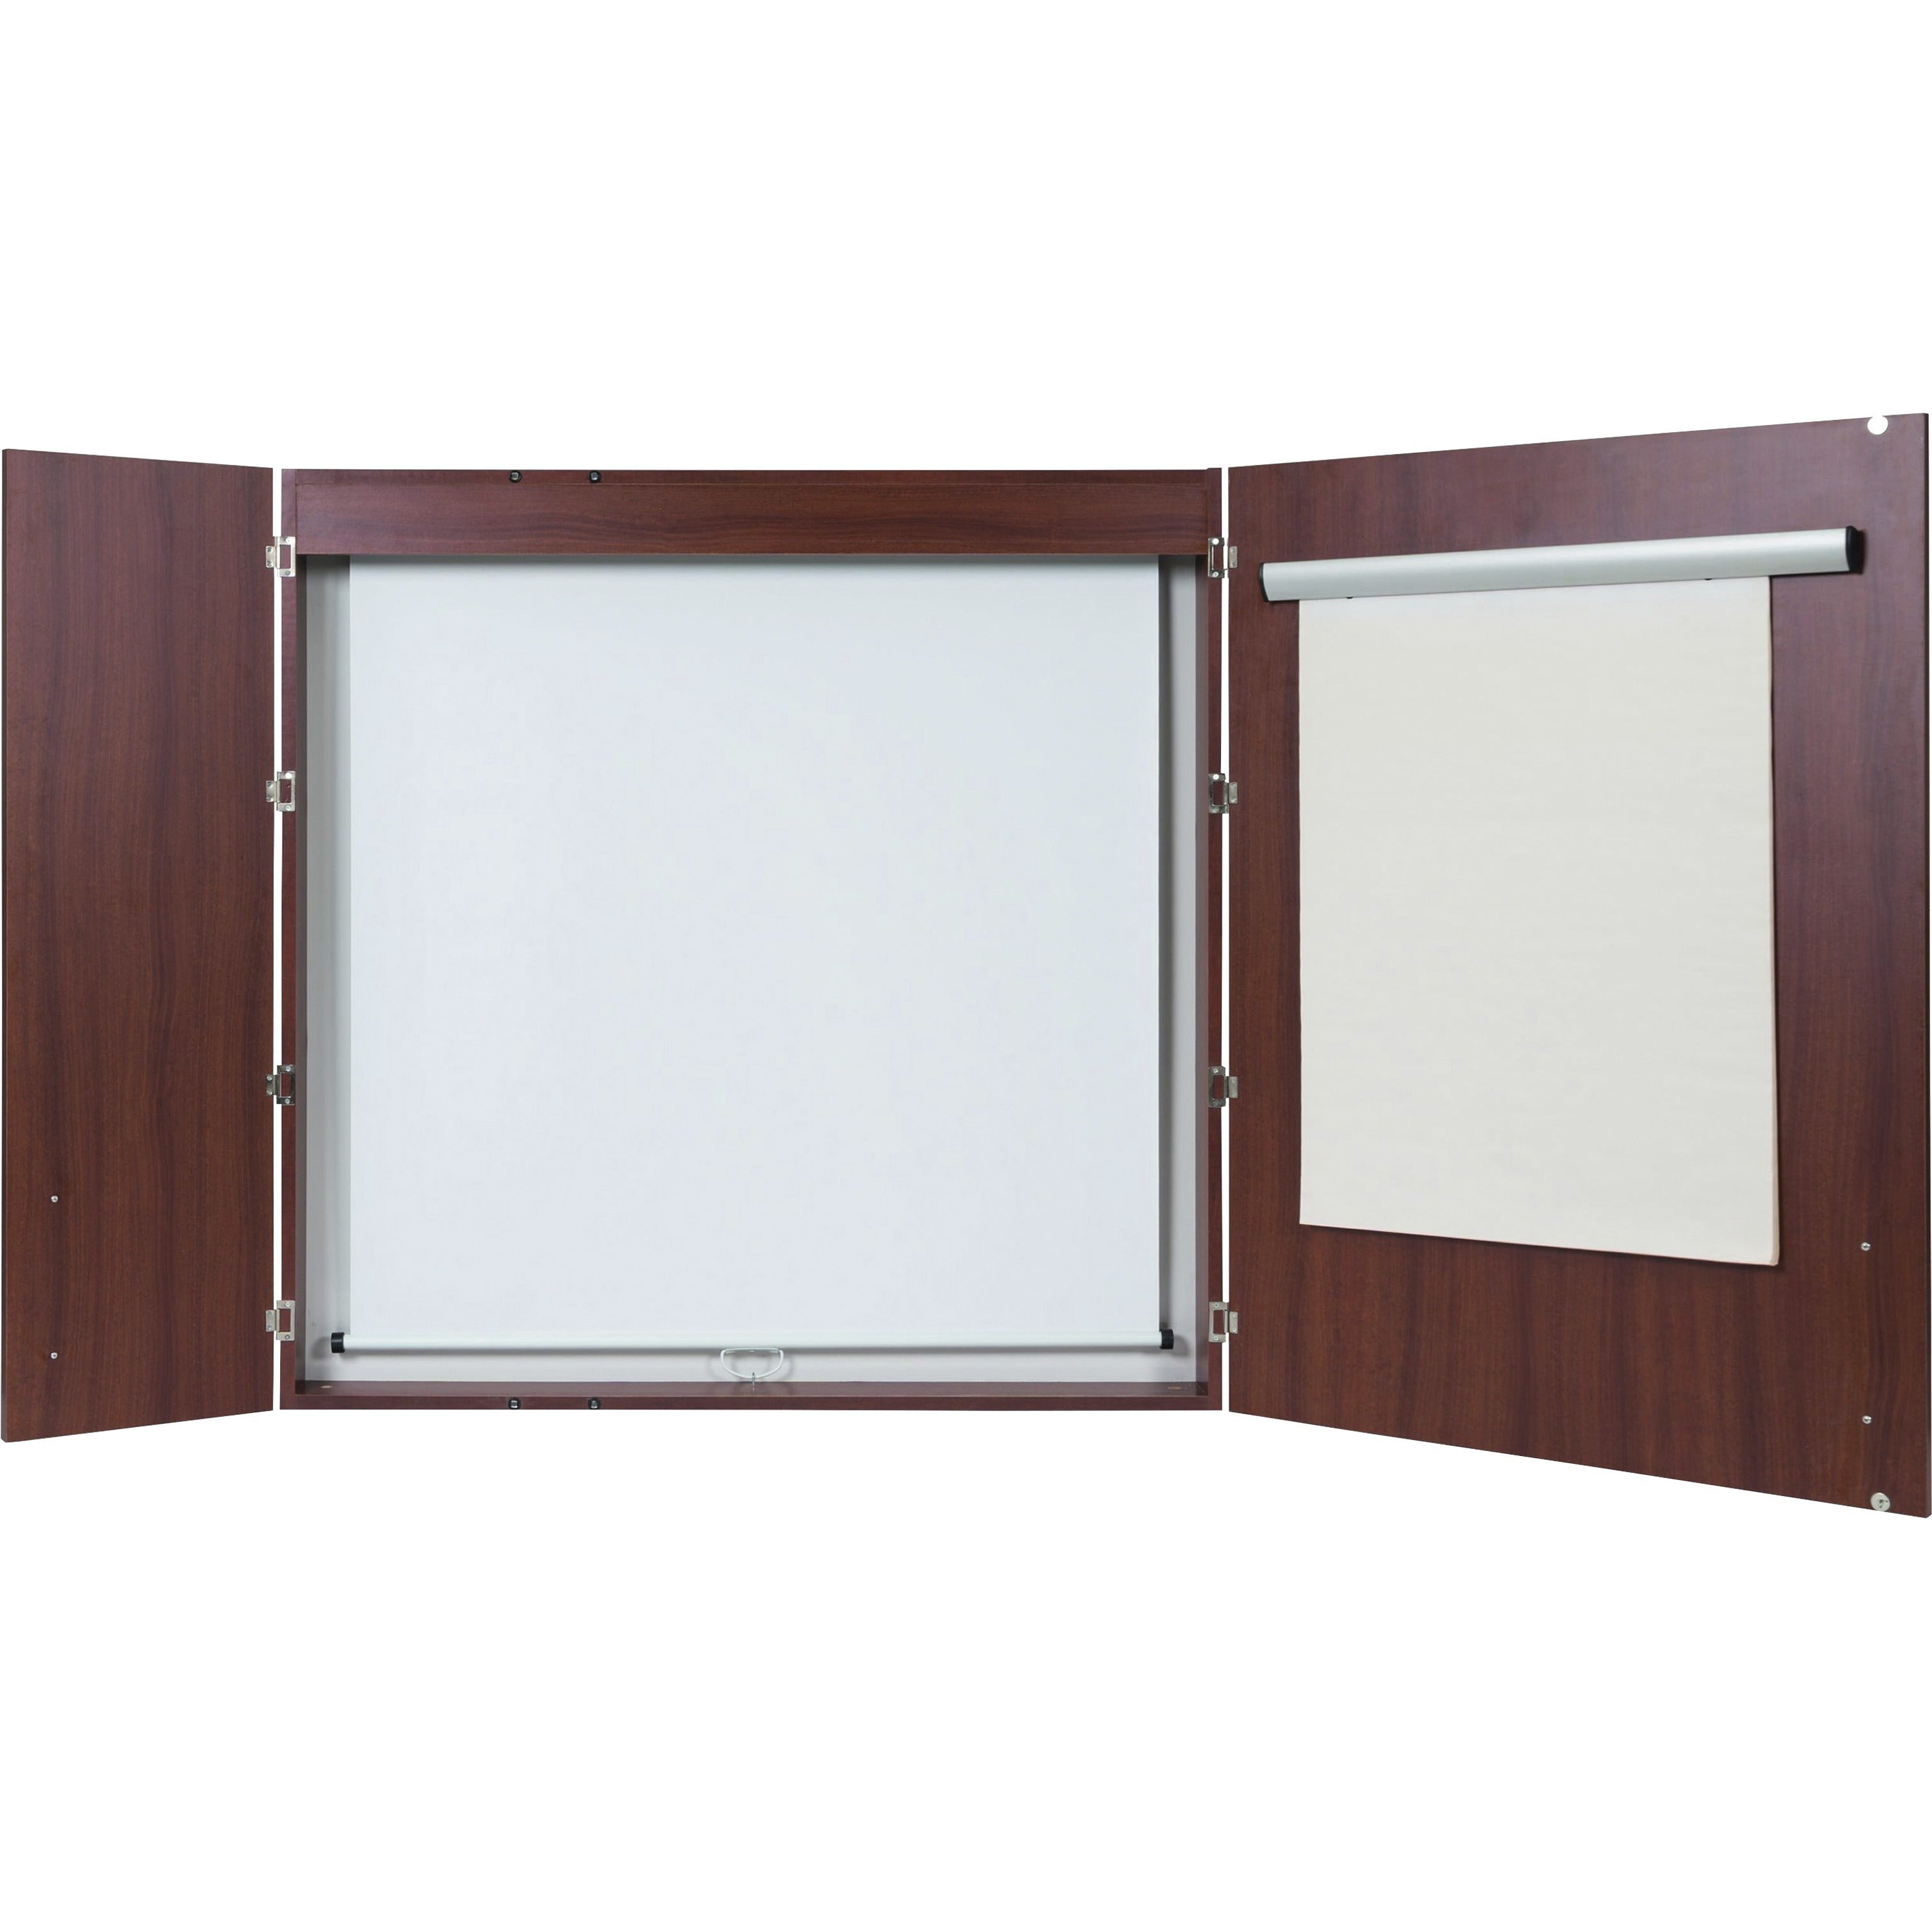 MasterVision 2-door Cherry Conference Cabinet - 48" Height x 48" Width - Porcelain Steel Surface - Cherry Wood Frame - 1 Each - 